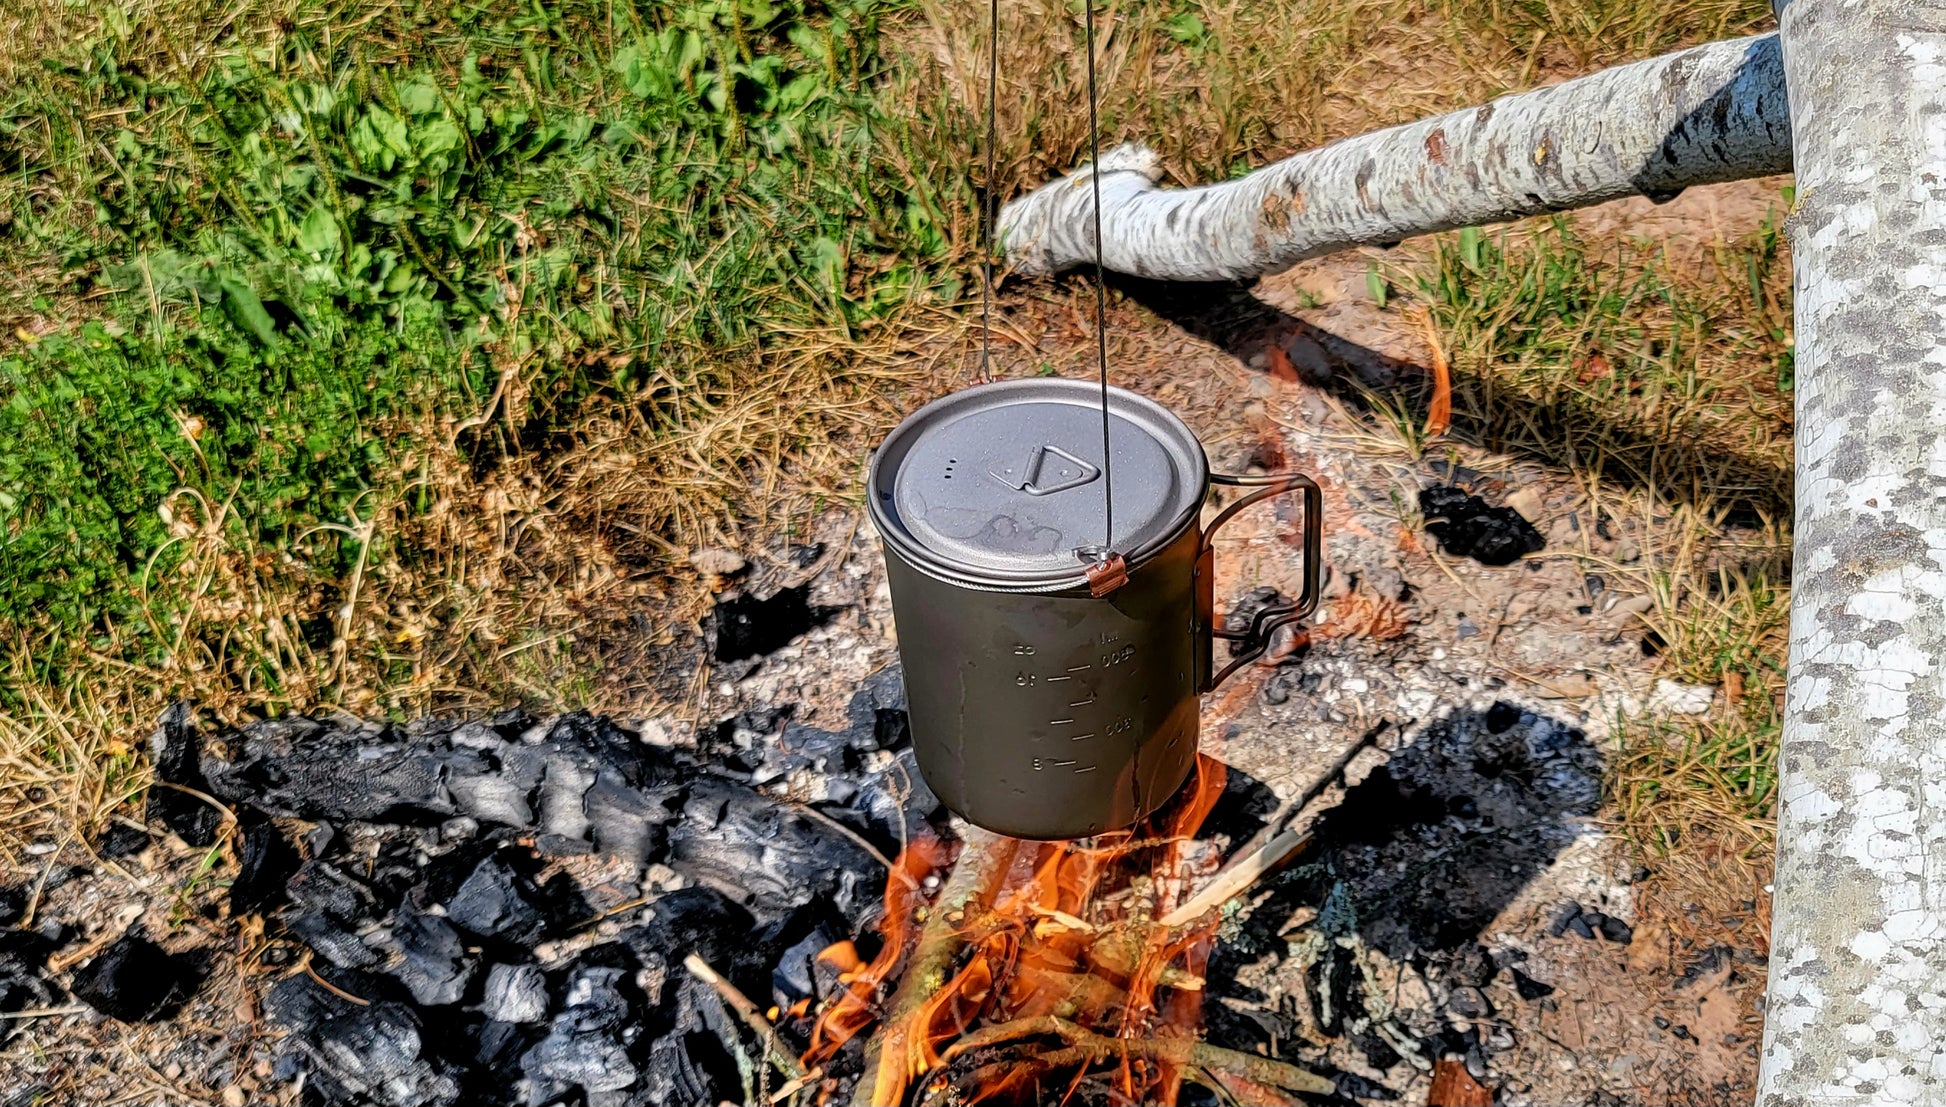 Brautigam Expedition Works Camp Snare uses titanium cup to cook over fire